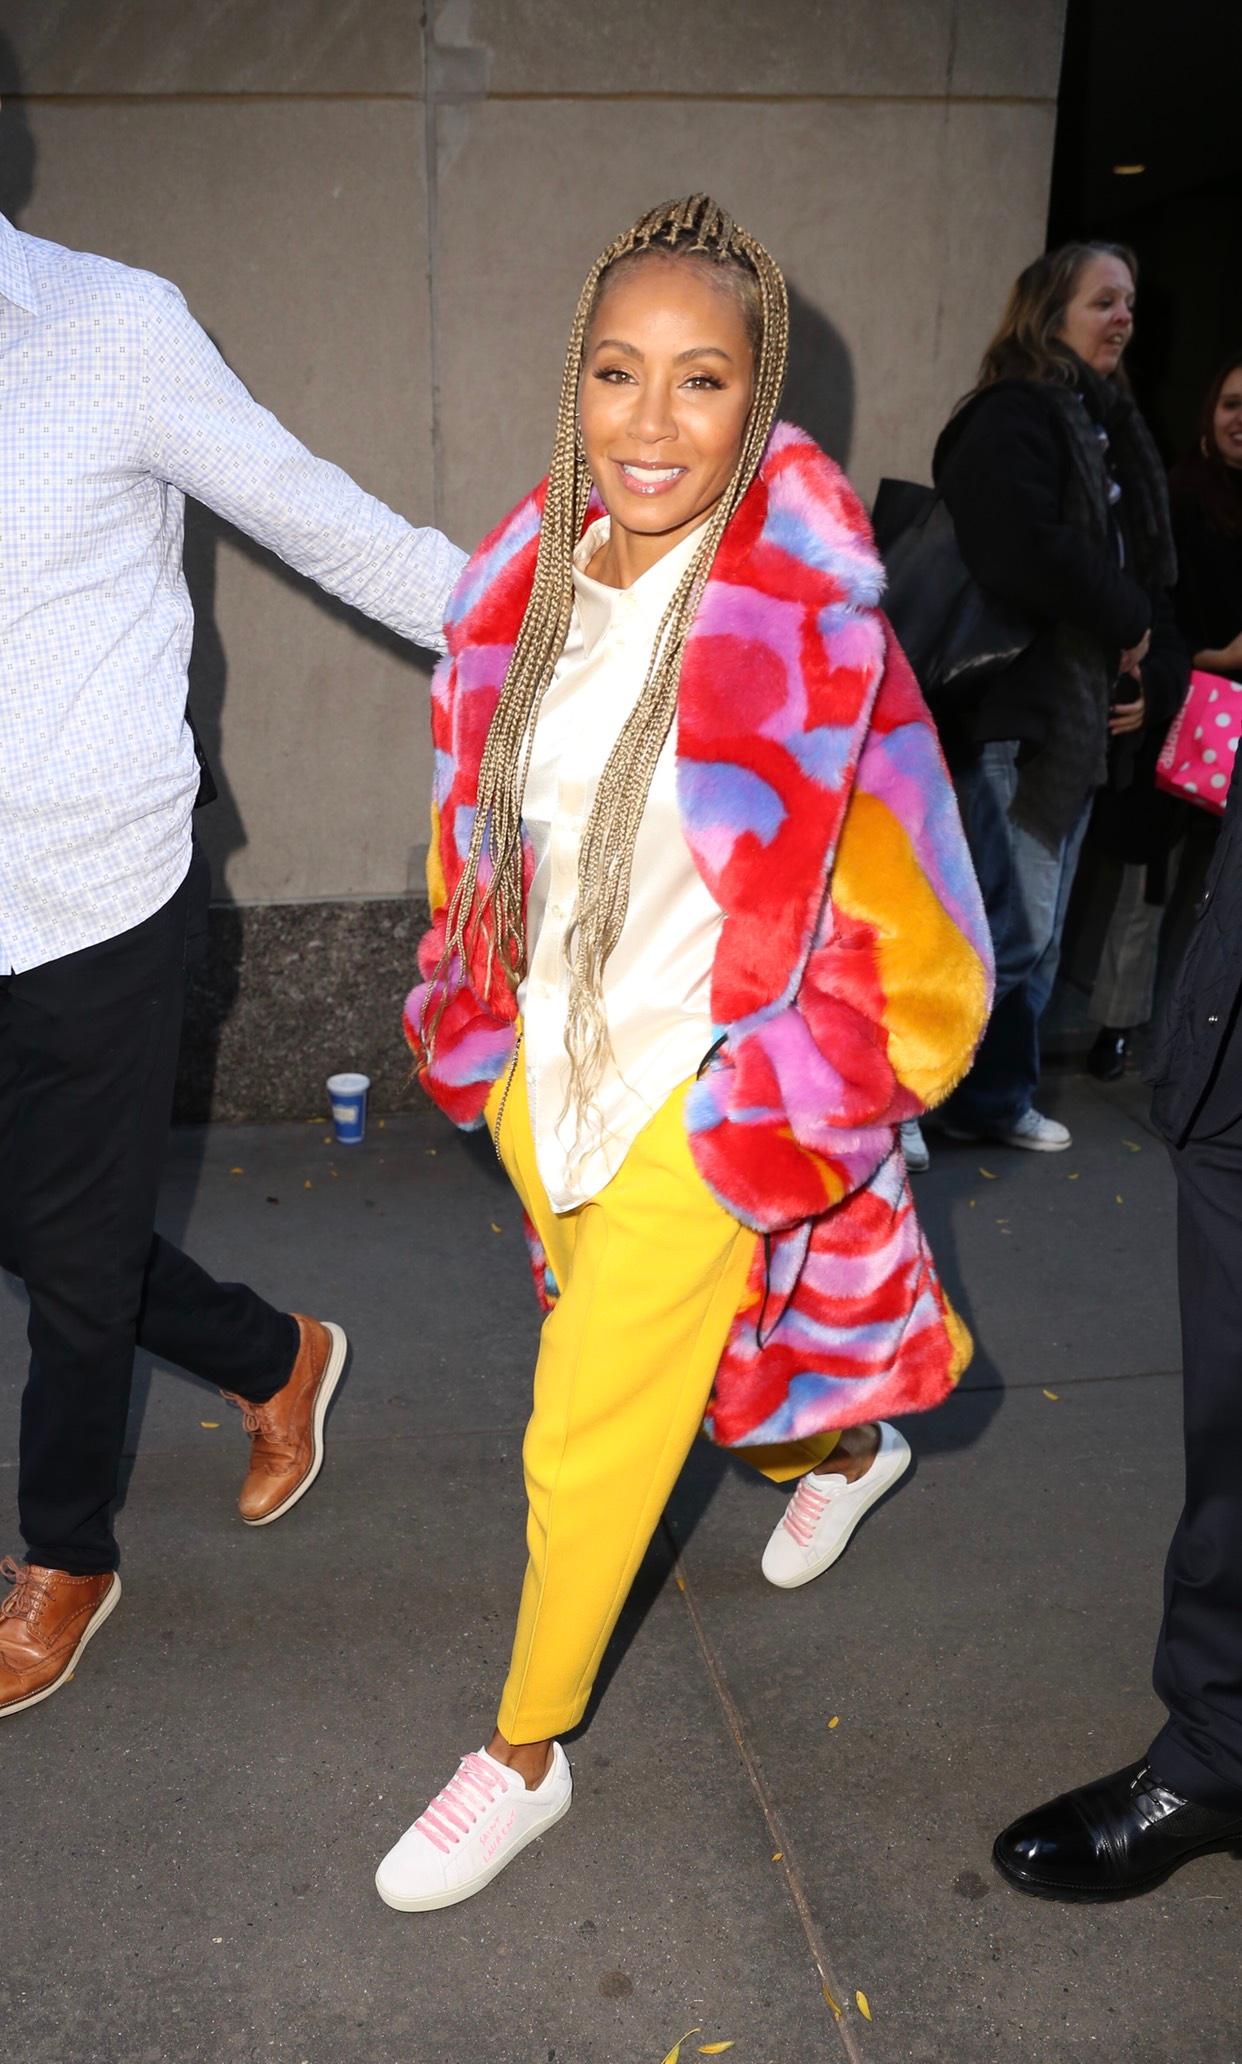 Jada Pinkett Smith is seen at the Today Show